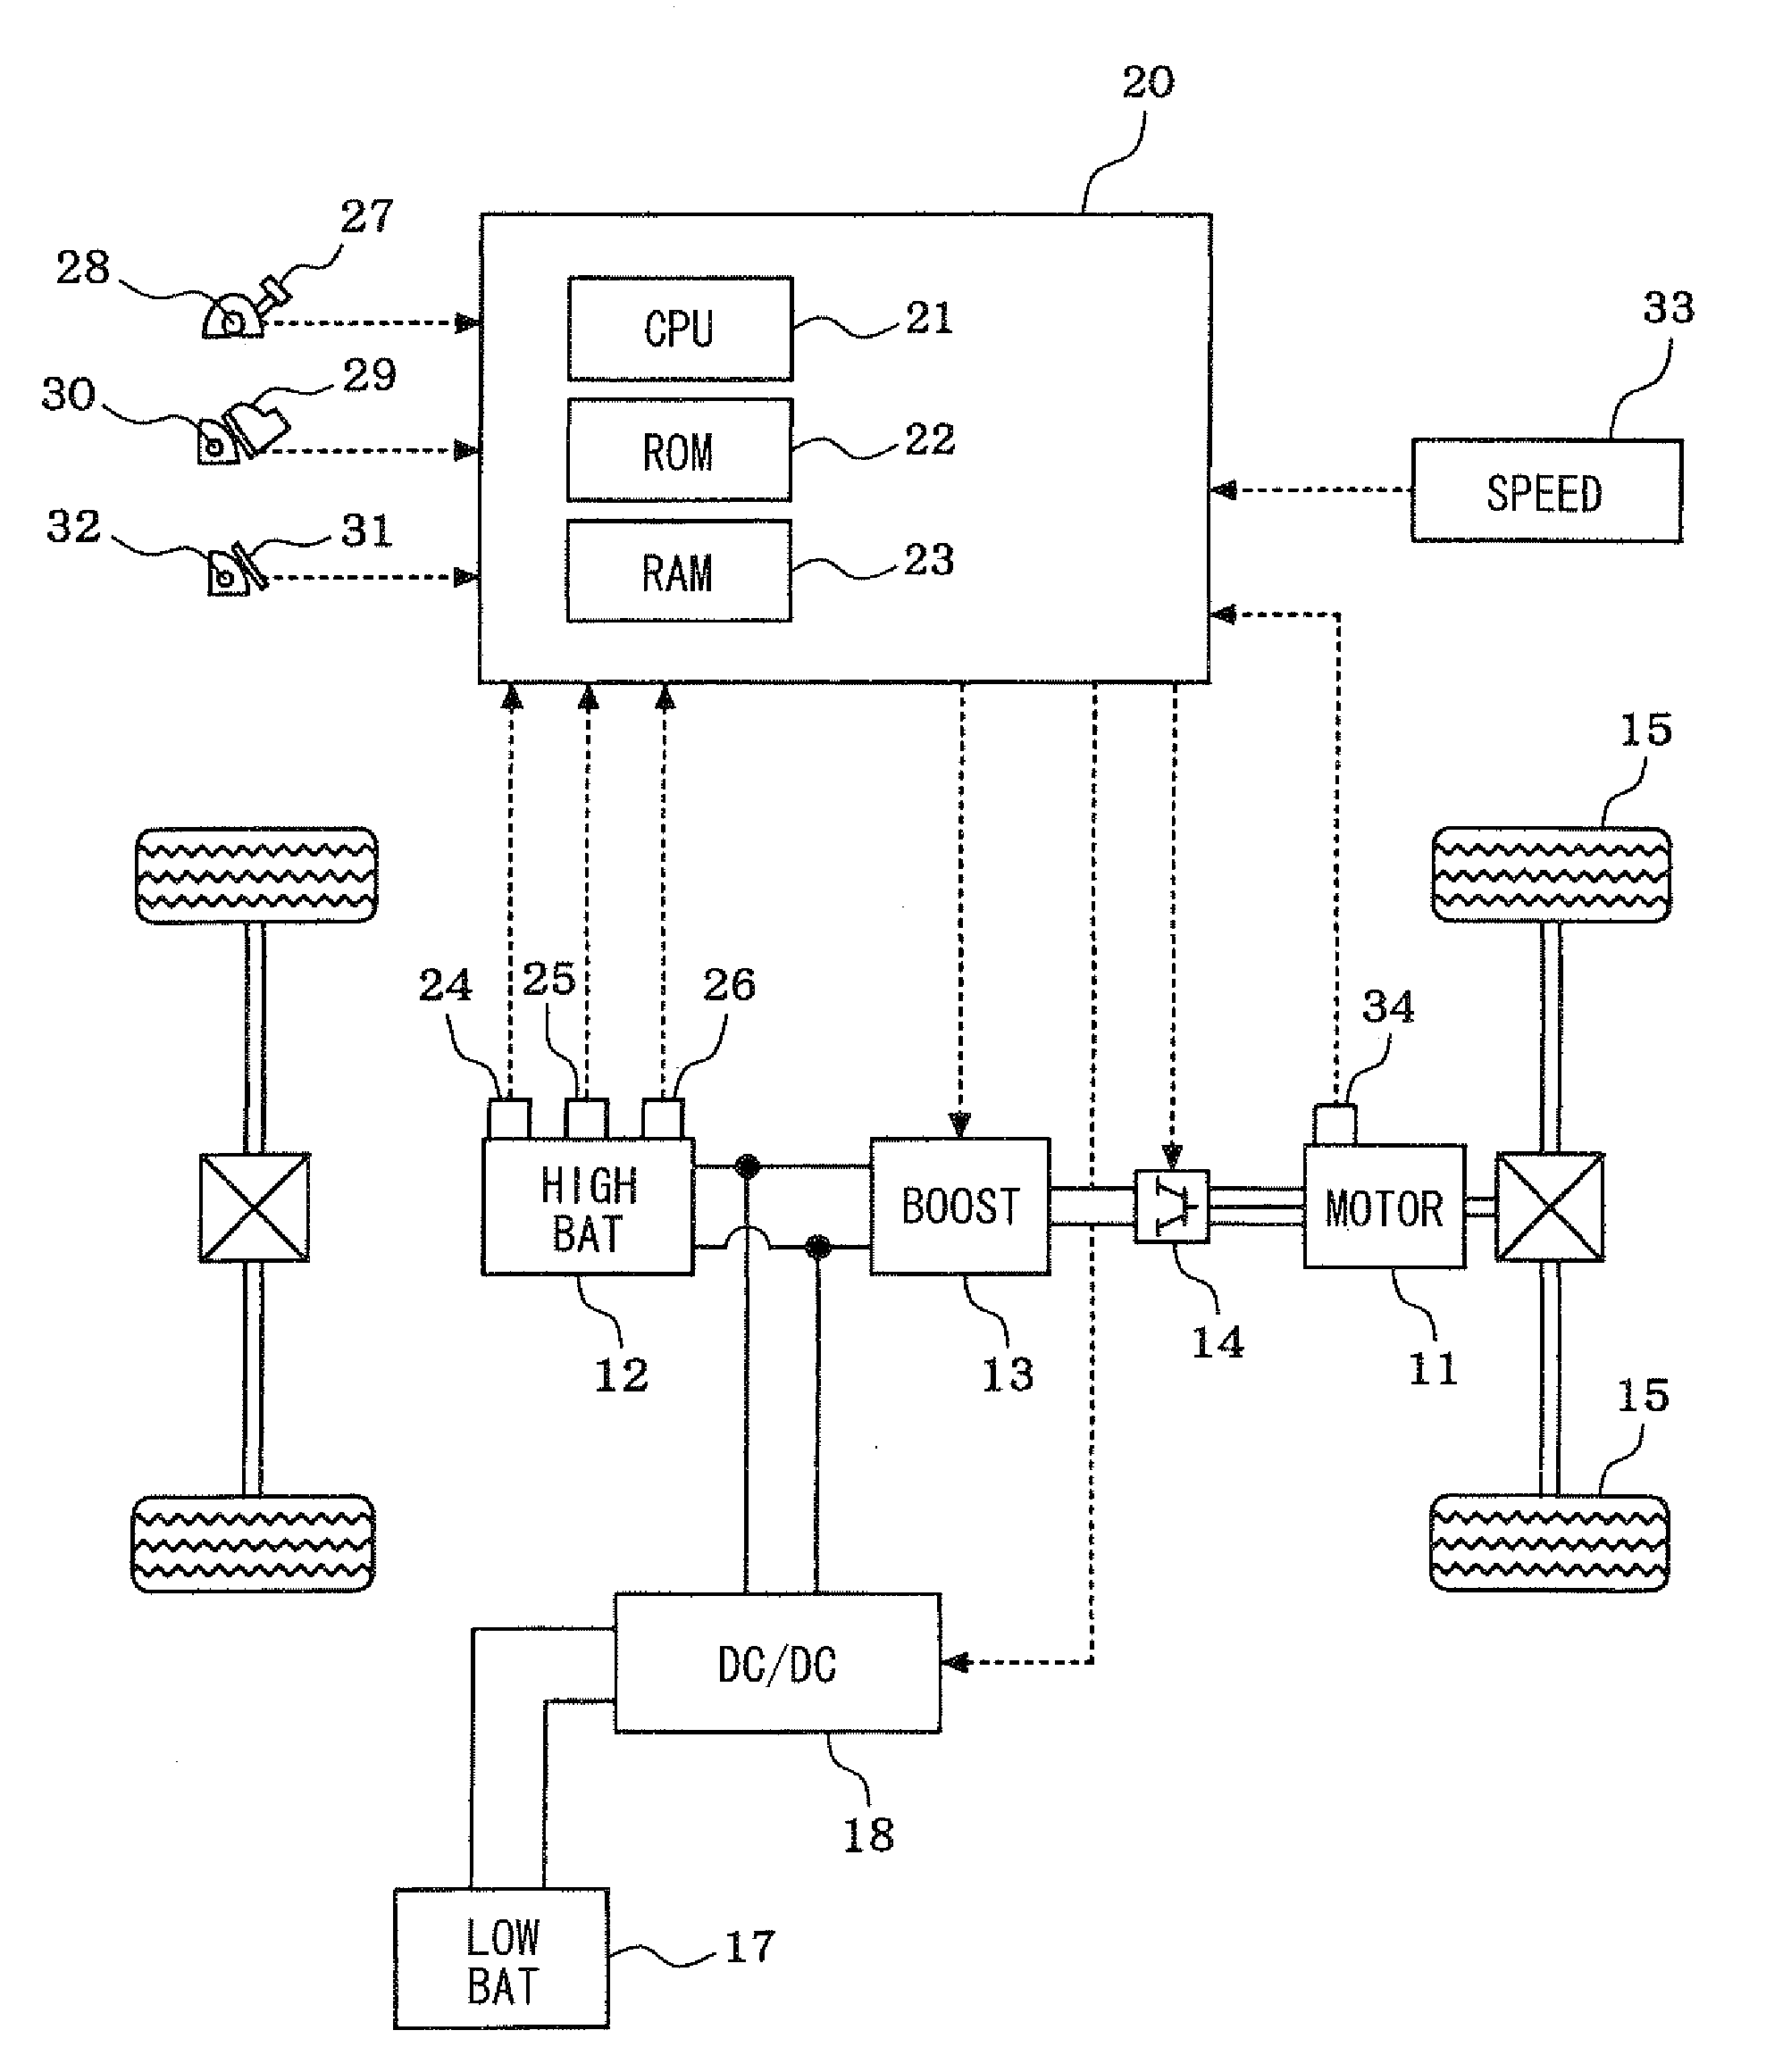 Battery temperature control system